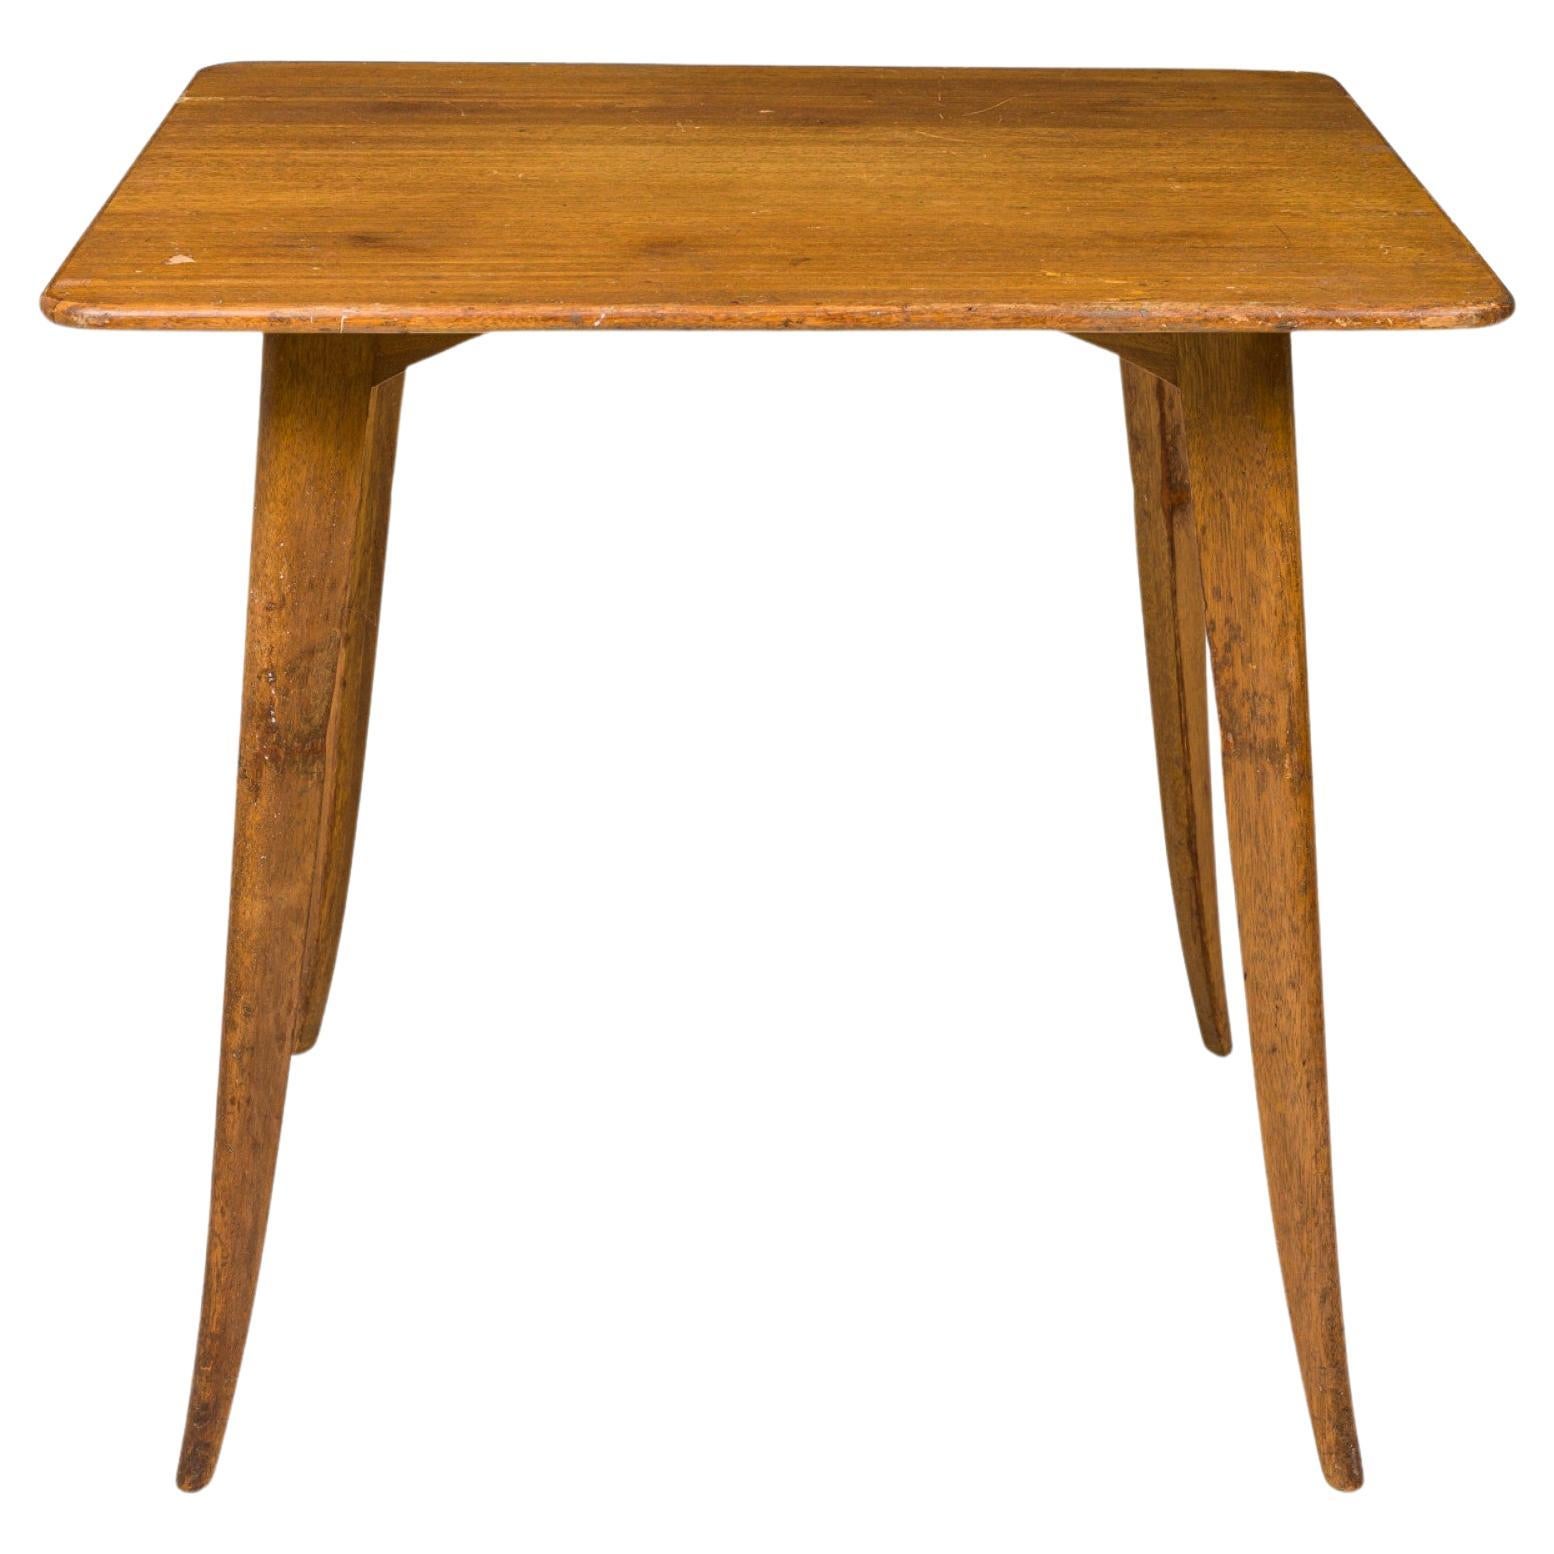 Edward J Wormley for Dunbar Furniture Company Square Wooden Game Table